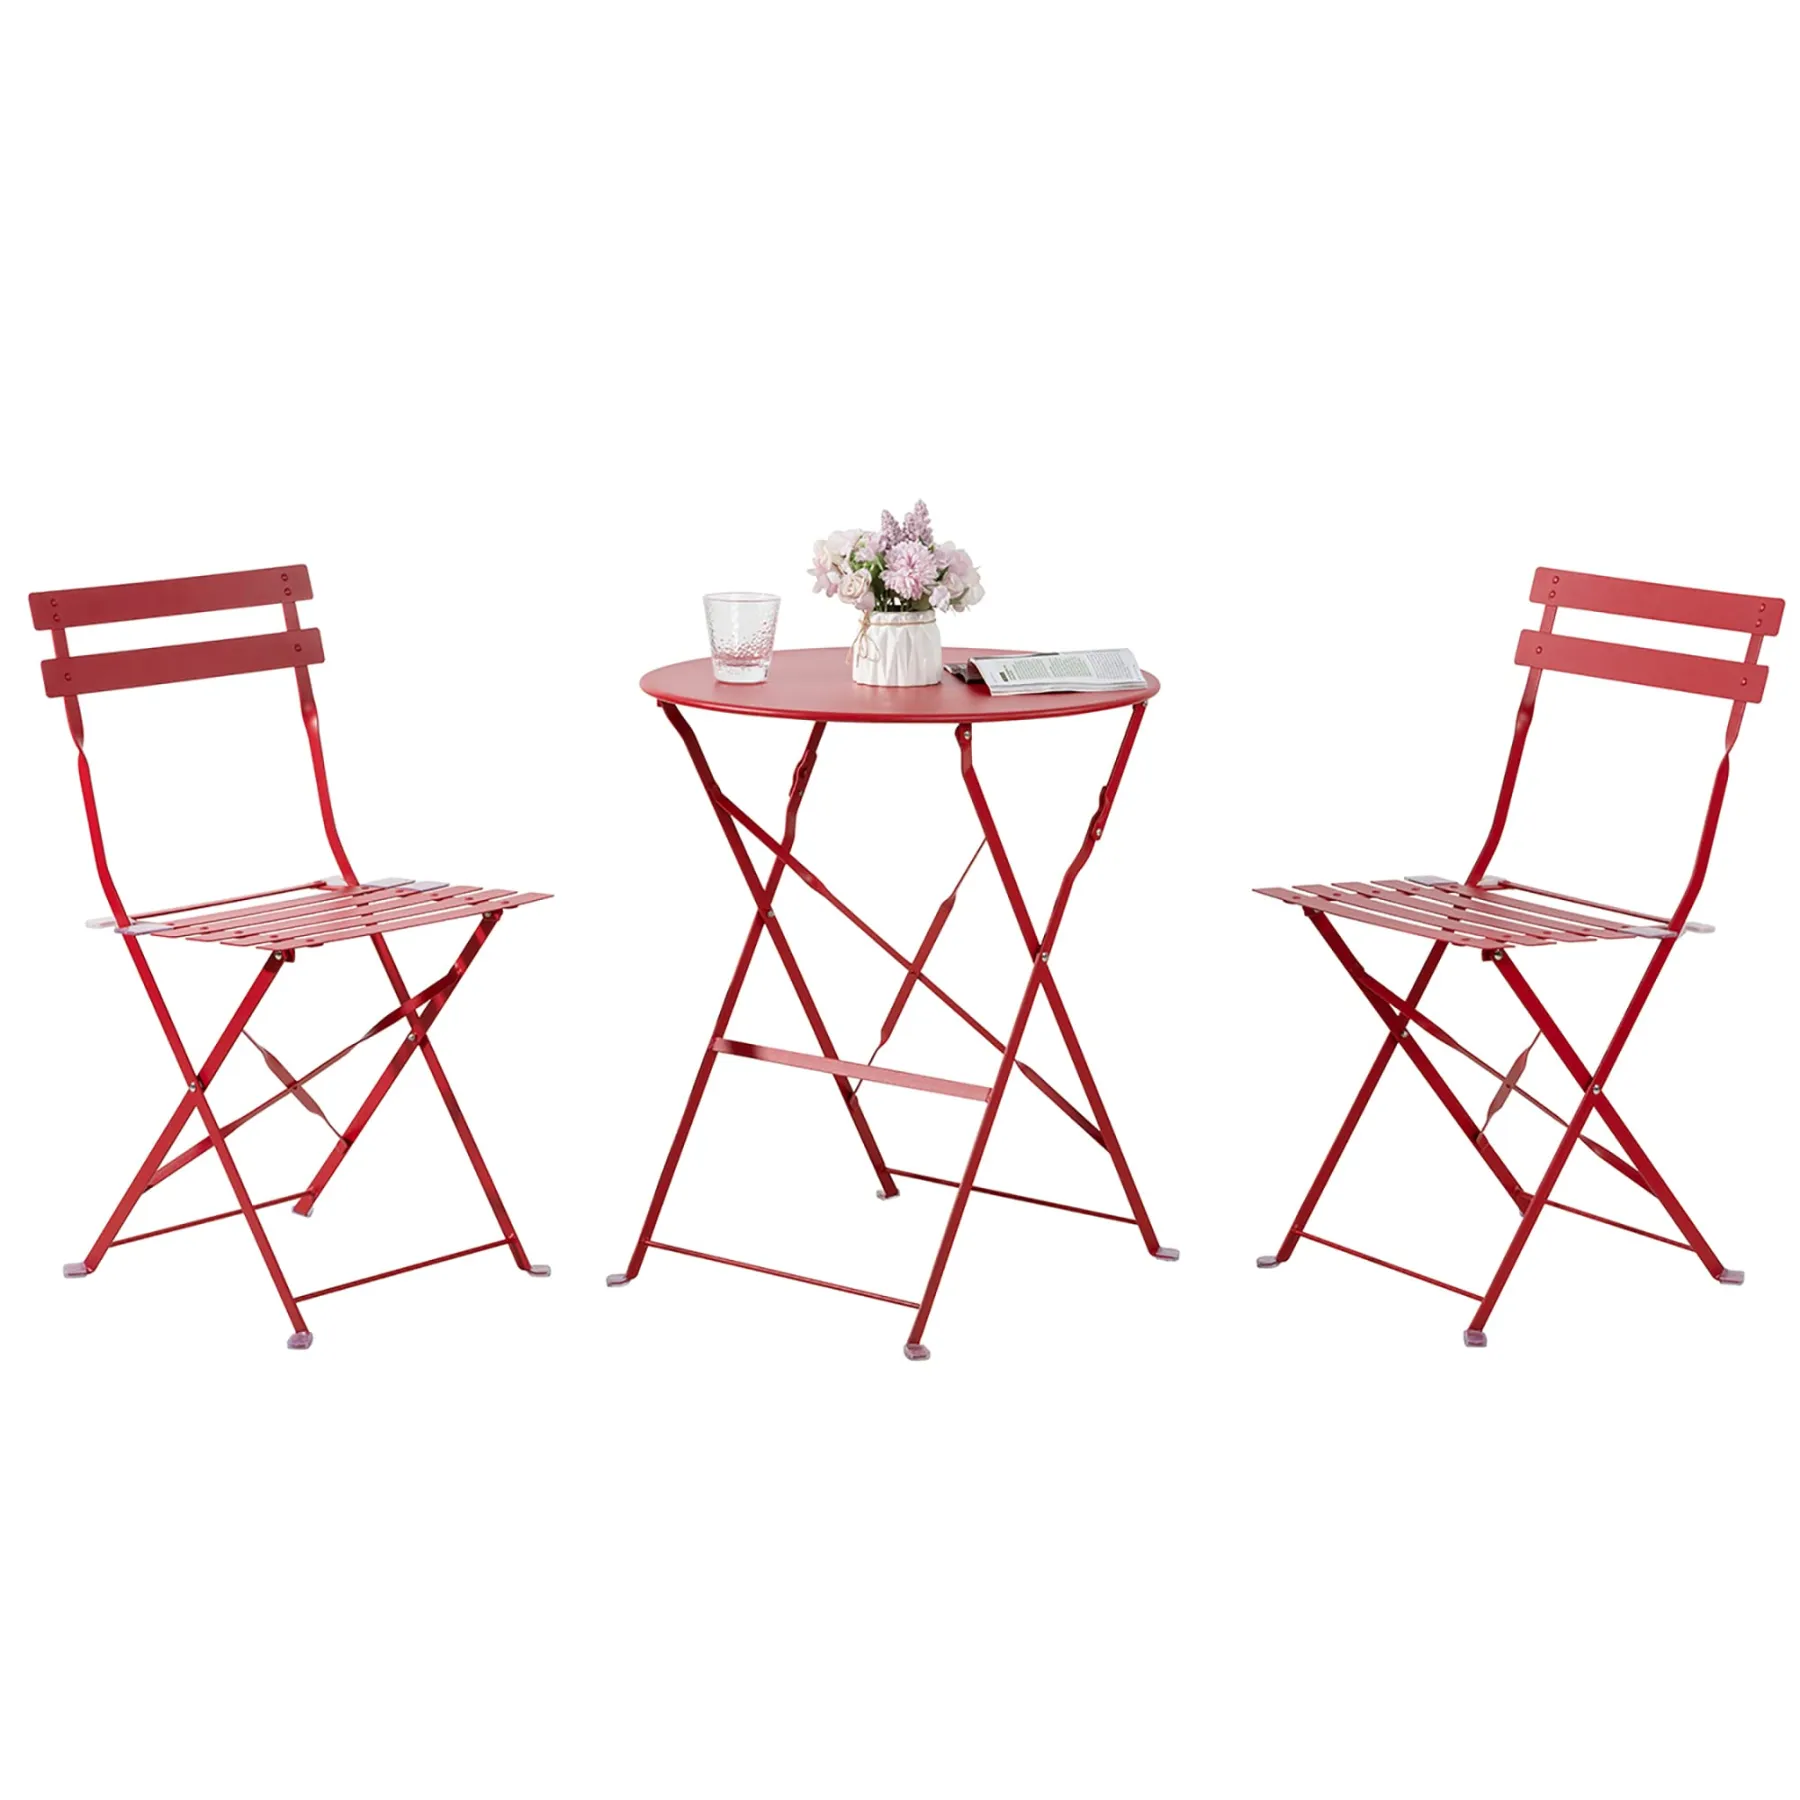 3-Piece Powder-Coated Iron Bistro Set of Foldable Garden Table and Chairs in Red